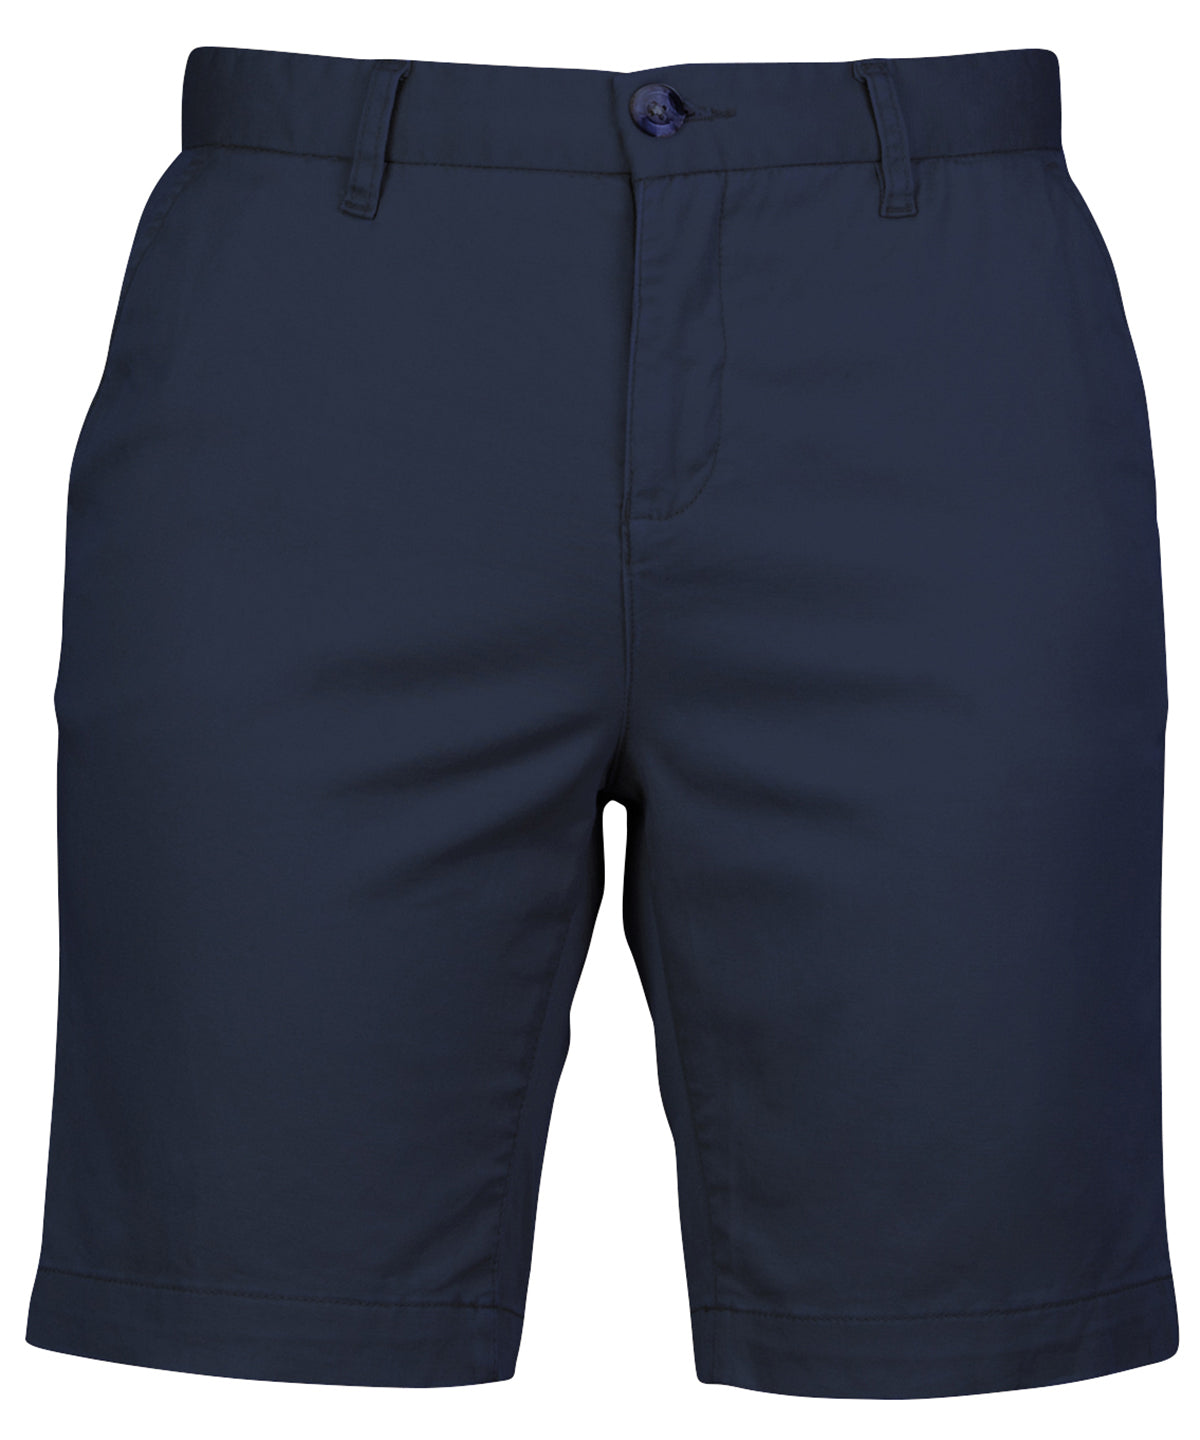 Personalised Shorts - Navy Front Row Women's stretch chino shorts